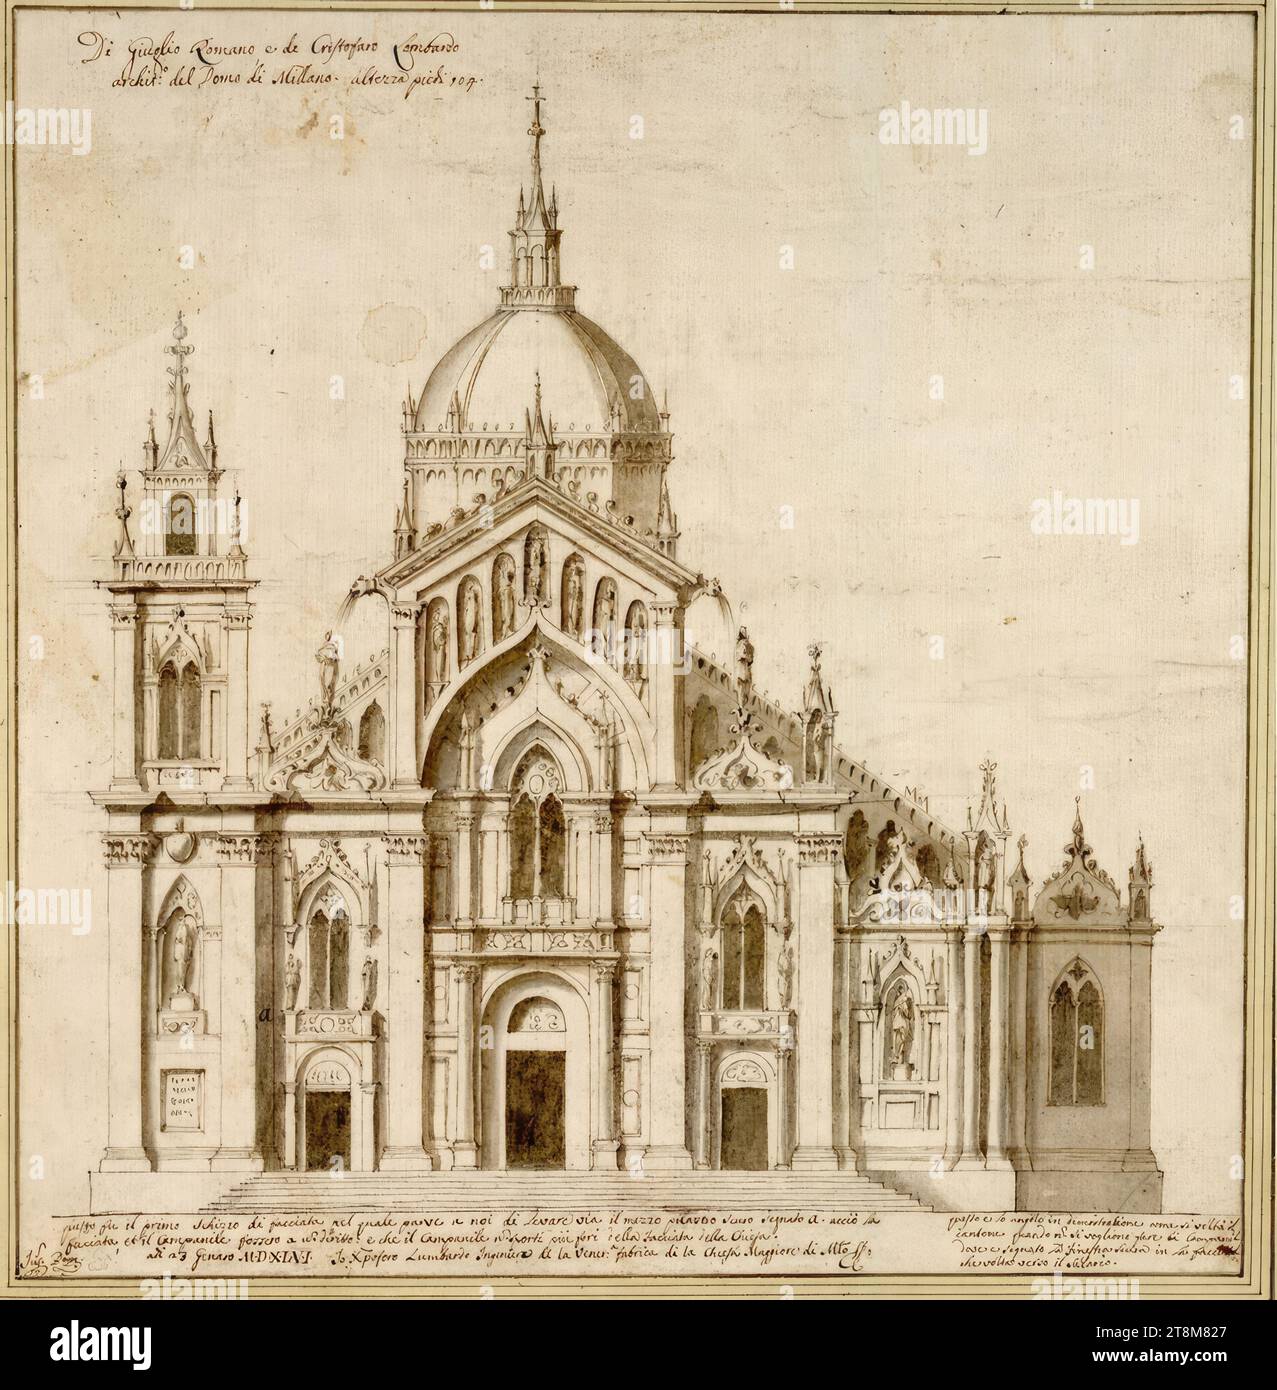 Die Fassade von S. Petronio in Bologna, Anonym WVDSDSW, Lombardisch), Zeichnung, Feder, graubraun laviert, 34.2 x 33.2 cm, l.u. Herzog Albert von Sachsen-Teschen, links oben: 'By Giulio Romano and Cristofano Lombardo, archito¬ of the Domo di Millano. Height feet 104.'; links unten als Signatur 'Jul. Rom.'; am unteren Rand links 'this was the first sketch of the facade in which we thought we had removed the dark half pillar, marked A - so, the facade, and the bell tower were straight: and that the bell tower should bear more holes in the facade of the church. Stock Photo